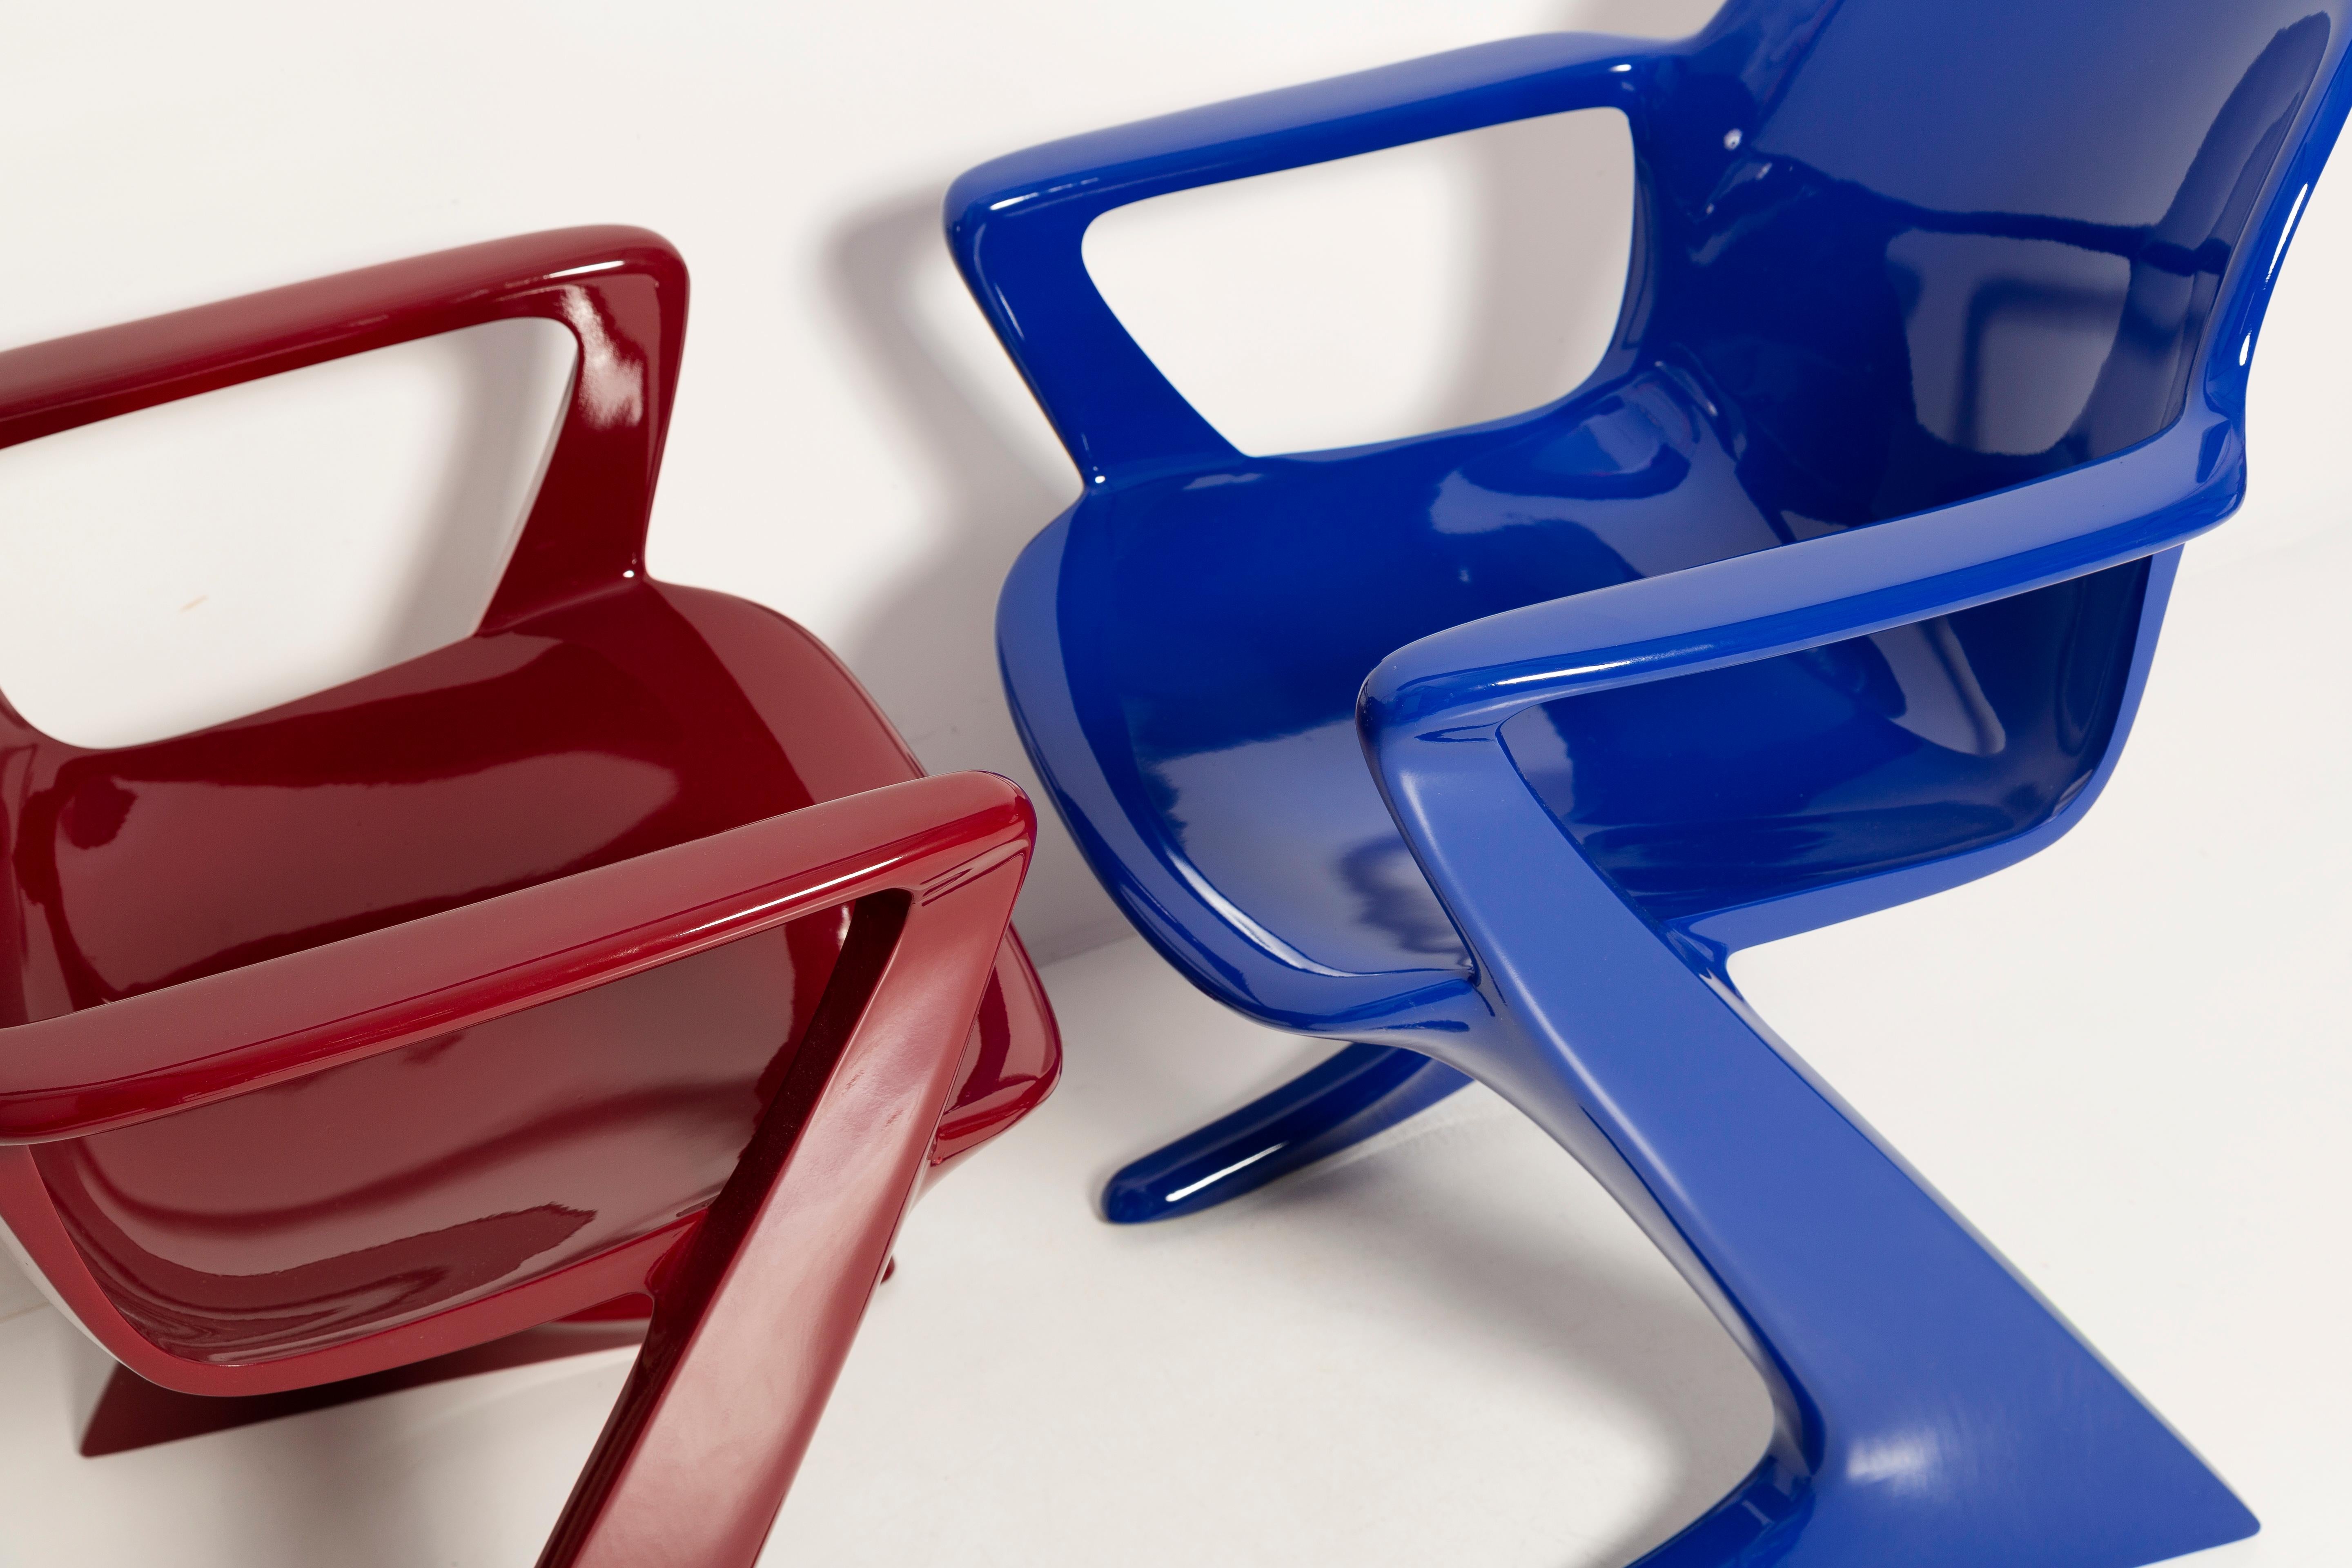 Lacquered Two Mid-Century Burgundy Red and Blue Kangaroo Chairs Ernst Moeckl Germany, 1968 For Sale